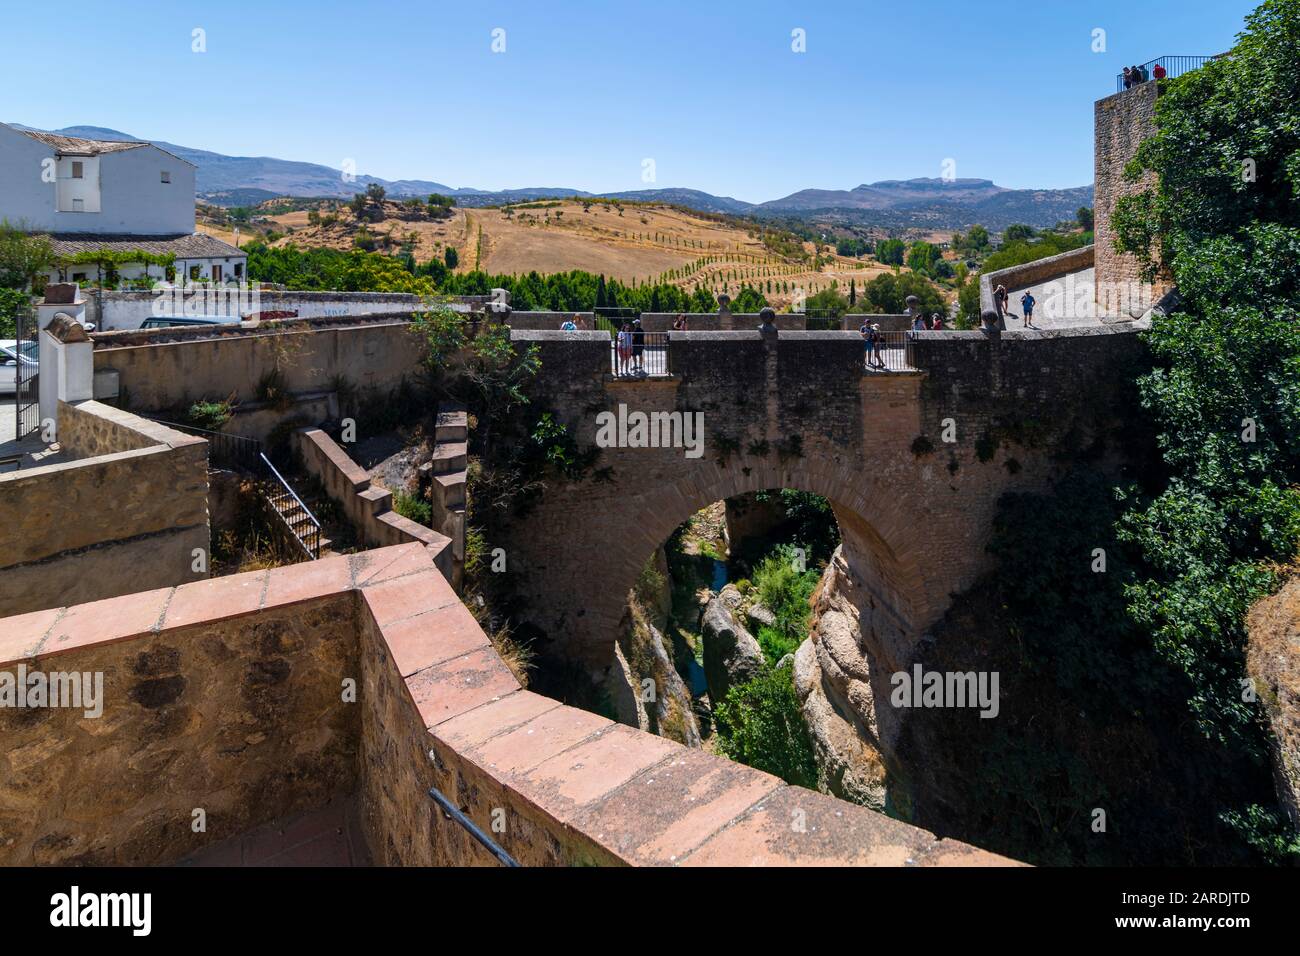 Ronda, Spain 08/17/2019; The old bridge was built in 1616, crosses the Guadalevin river, is 10 meters long and has a height of 30 meters. Stock Photo